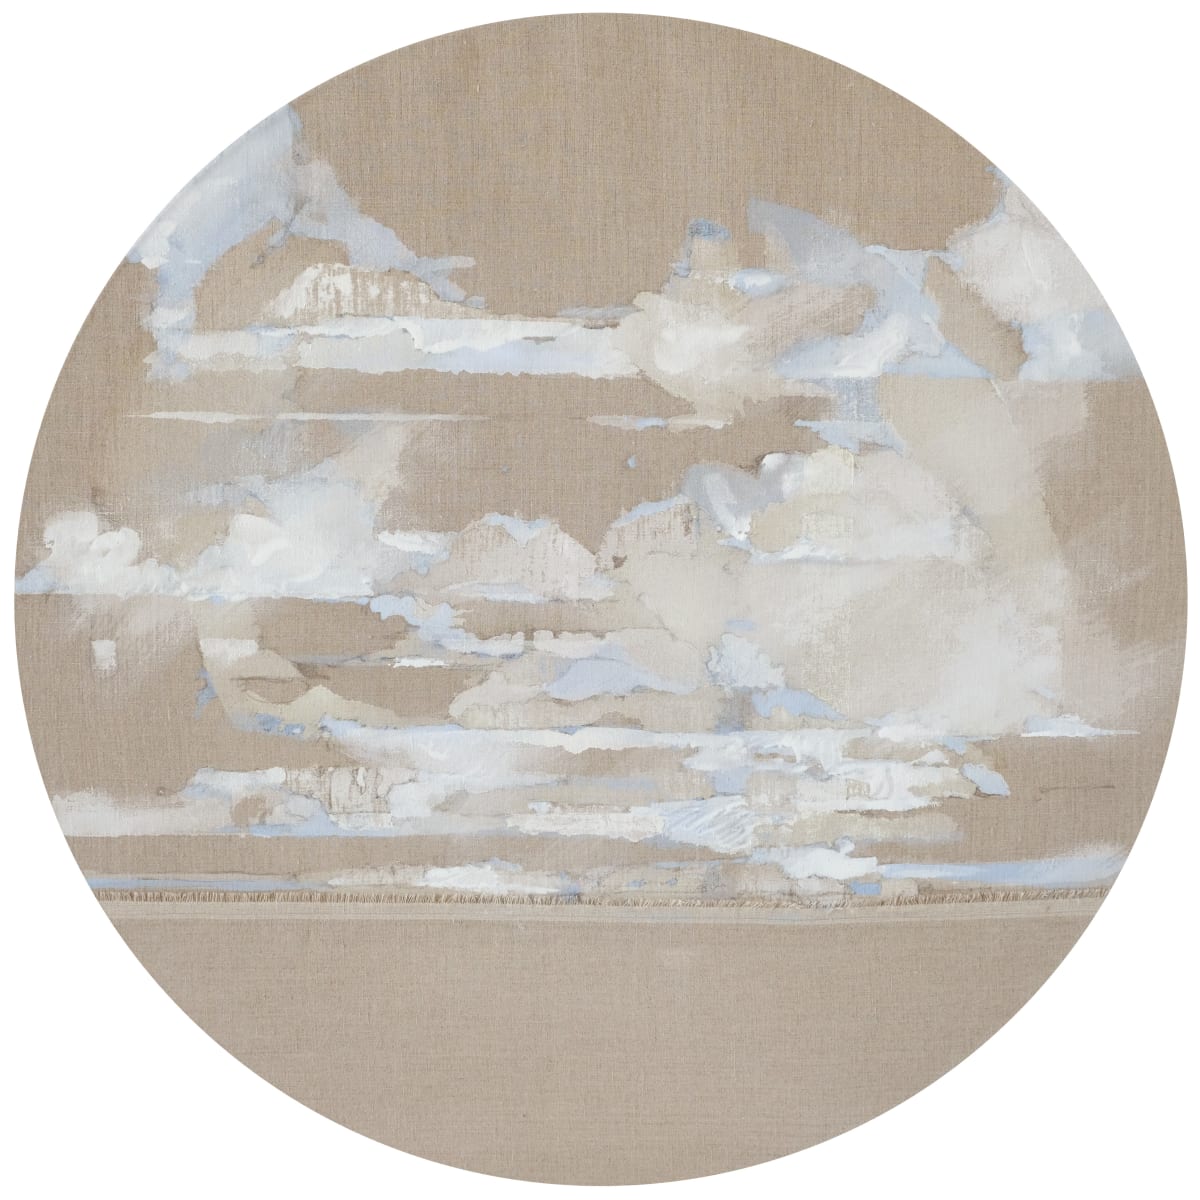 Under the Same Sky, 2 (VERSO) by Barbara Houston  Image: Seamed Belgian linen; Warp, weft shifted 90 degrees with salvage edge to emphasize the horizon line